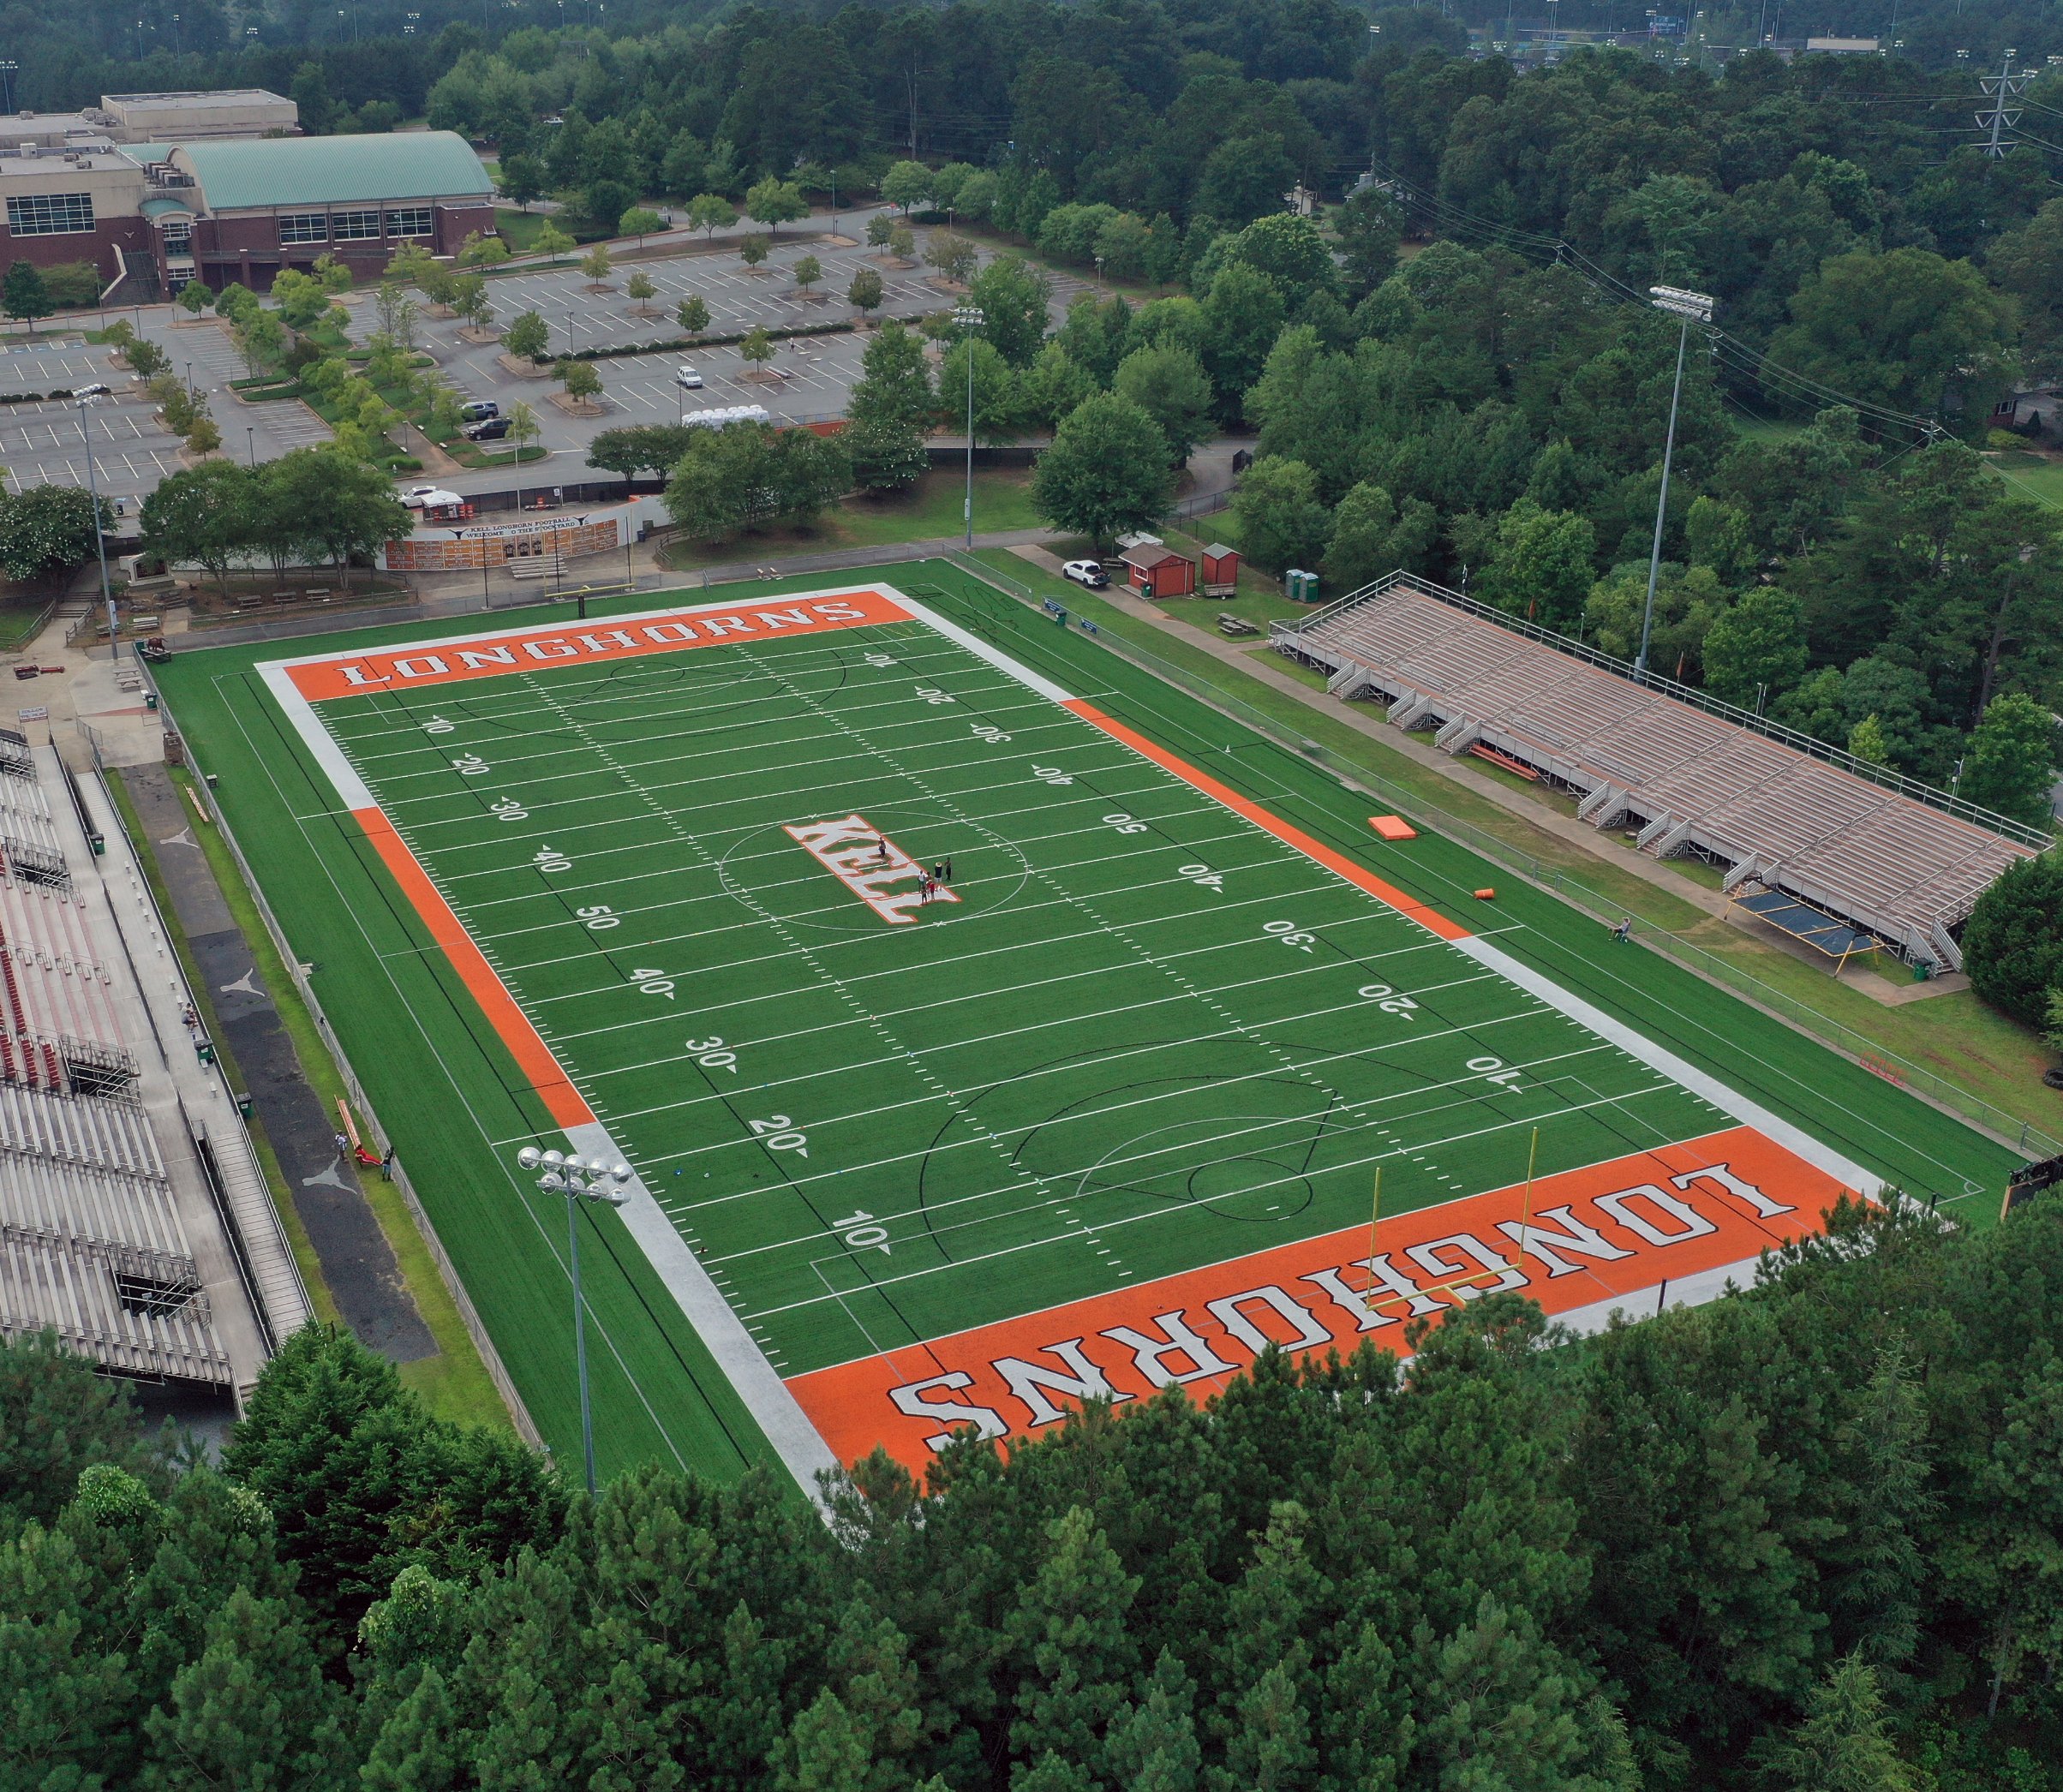 Sports Turf Company on X: Our #FieldoftheWeek this Friday is Lassiter High  School in Marietta, GA. The Trojans home stadium features AstroTurf  RootZone® 3D Decade System, a 60 oz. turf system with